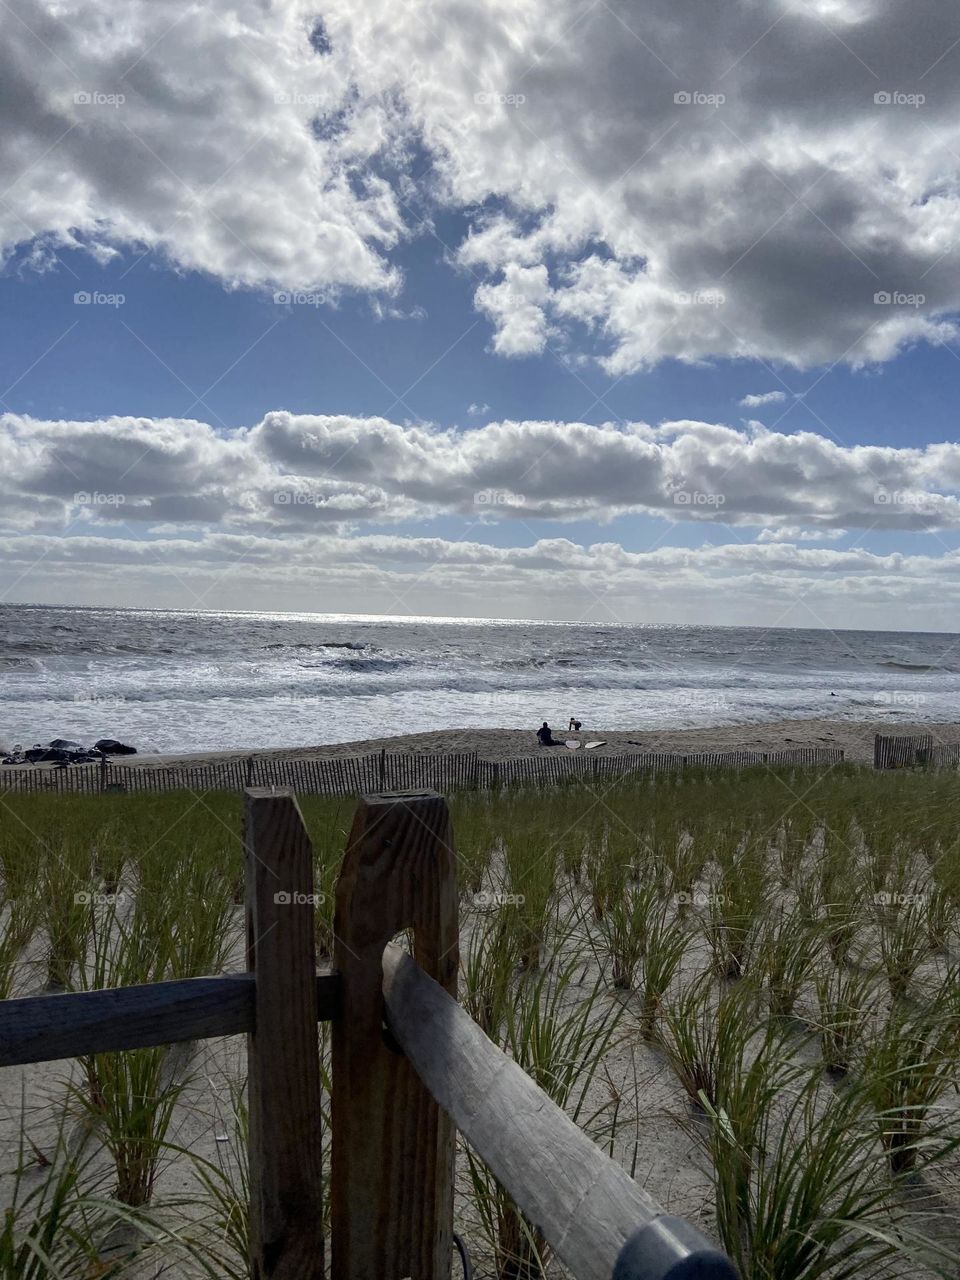 The grass-covered dunes on the beach in Bay Head, NJ. Taken from a platform you reach by stairs that offers an overhead view. Clouds fill the sky above, but in between are patches of bright blue. A few people are on the beach enjoying the ocean. 